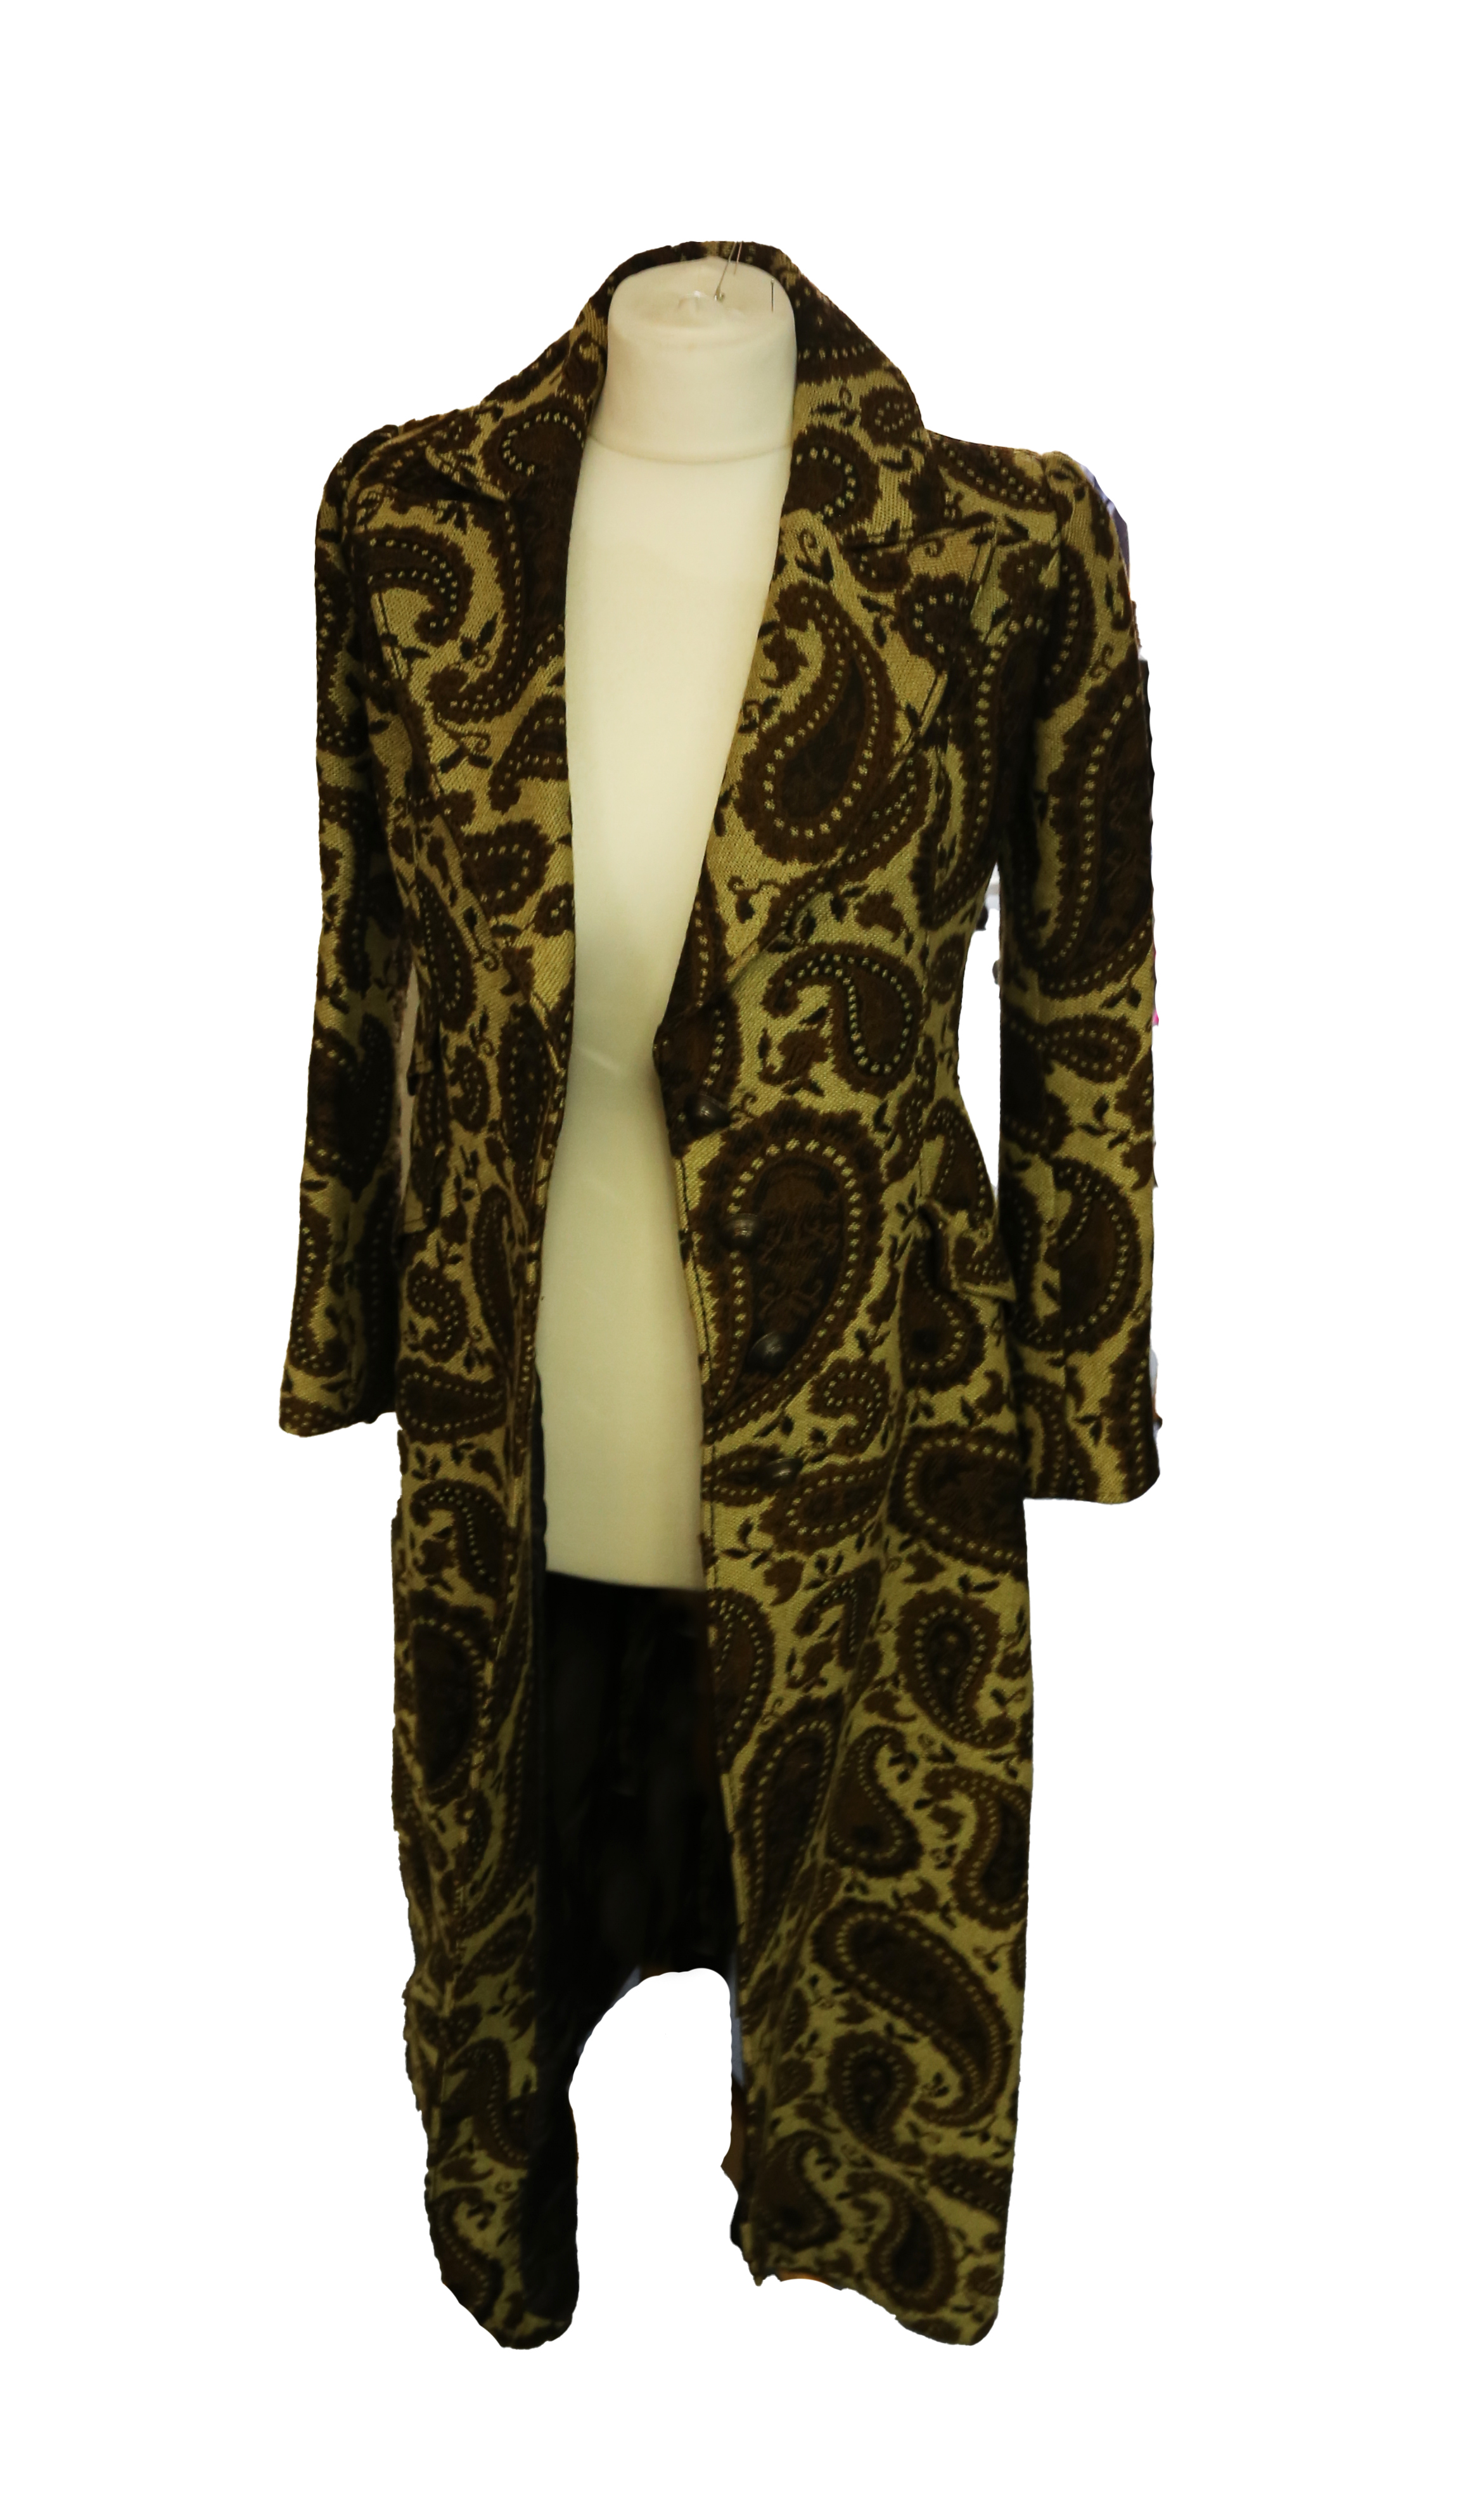 A 1970s wool-work/tapestry winter coat: the maxi coat is in a foliage and scroll pattern on a